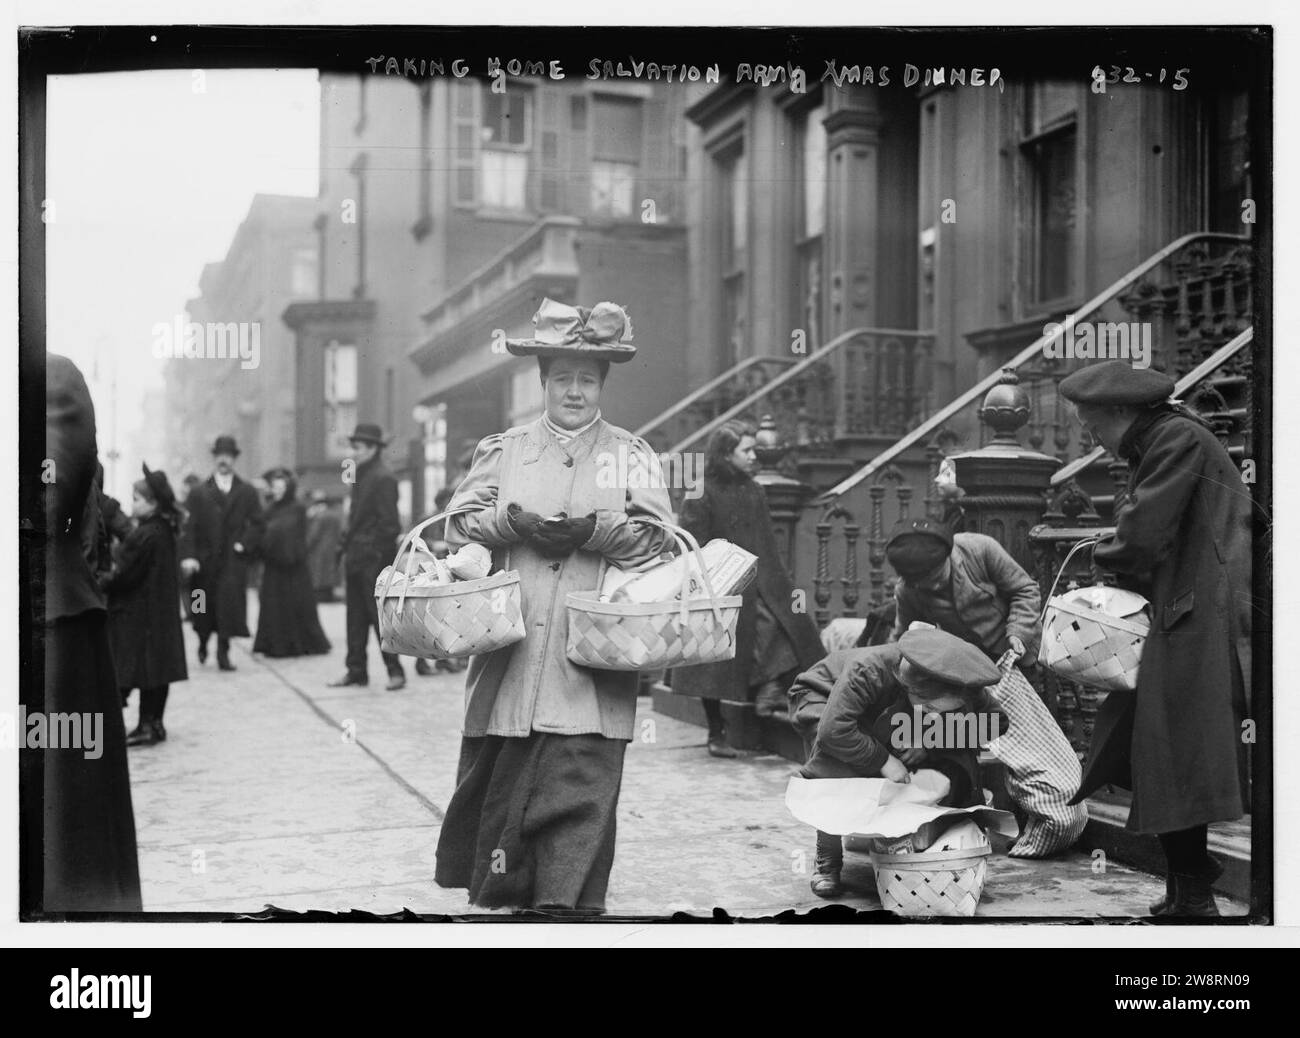 Women carrying baskets - Salvation Army Christmas dinner, New York Stock Photo